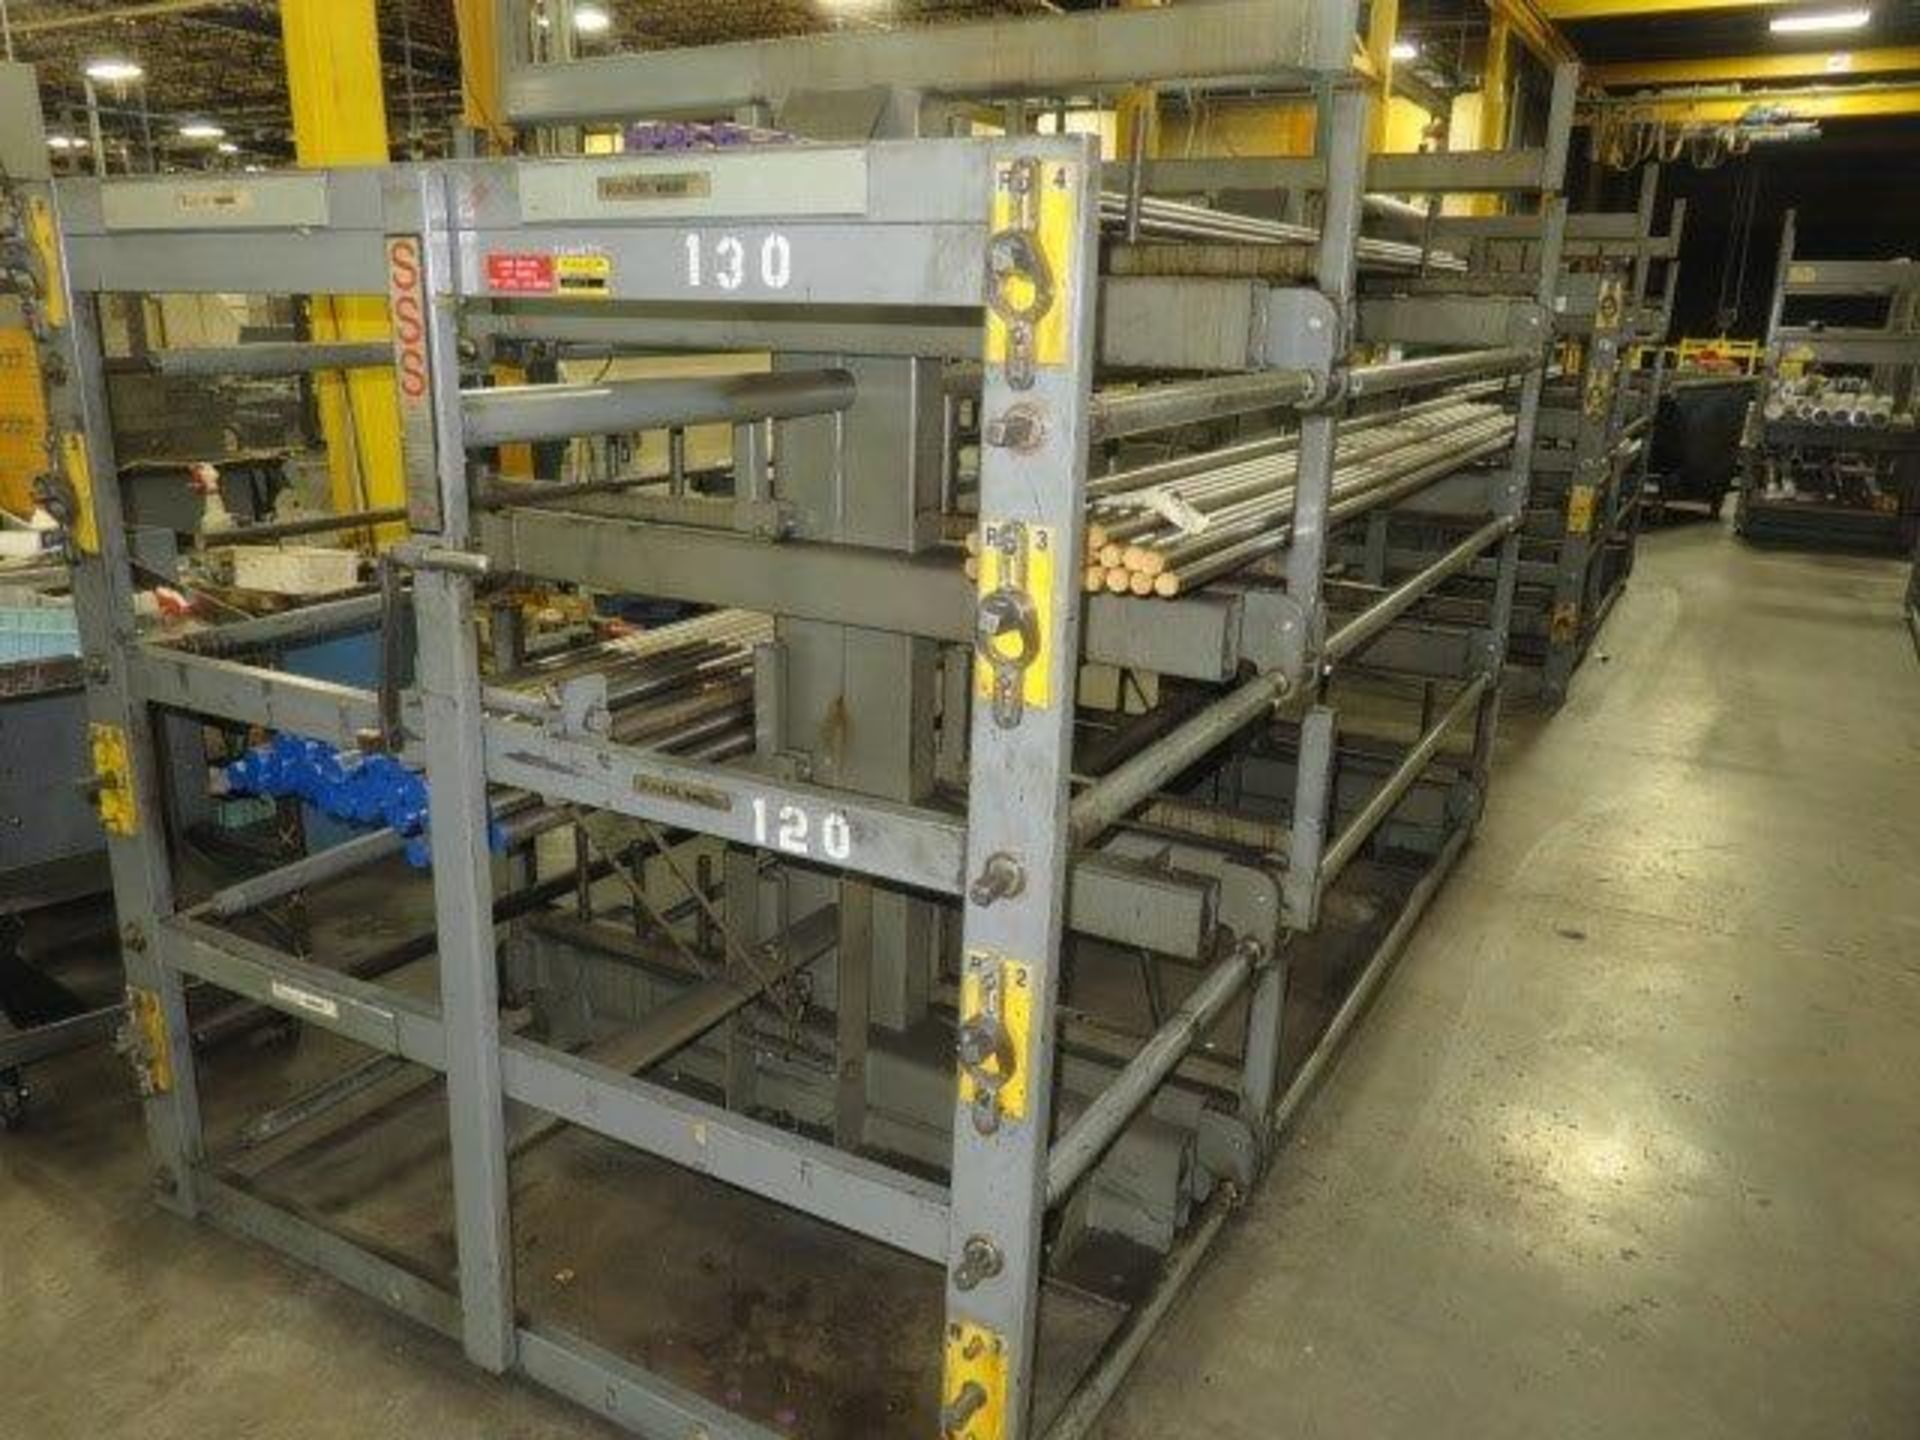 Carbon Steel Rods/Shafts (NEW Surplus Electrical Motor Parts) AND Distribution Metal Rack - Image 2 of 2